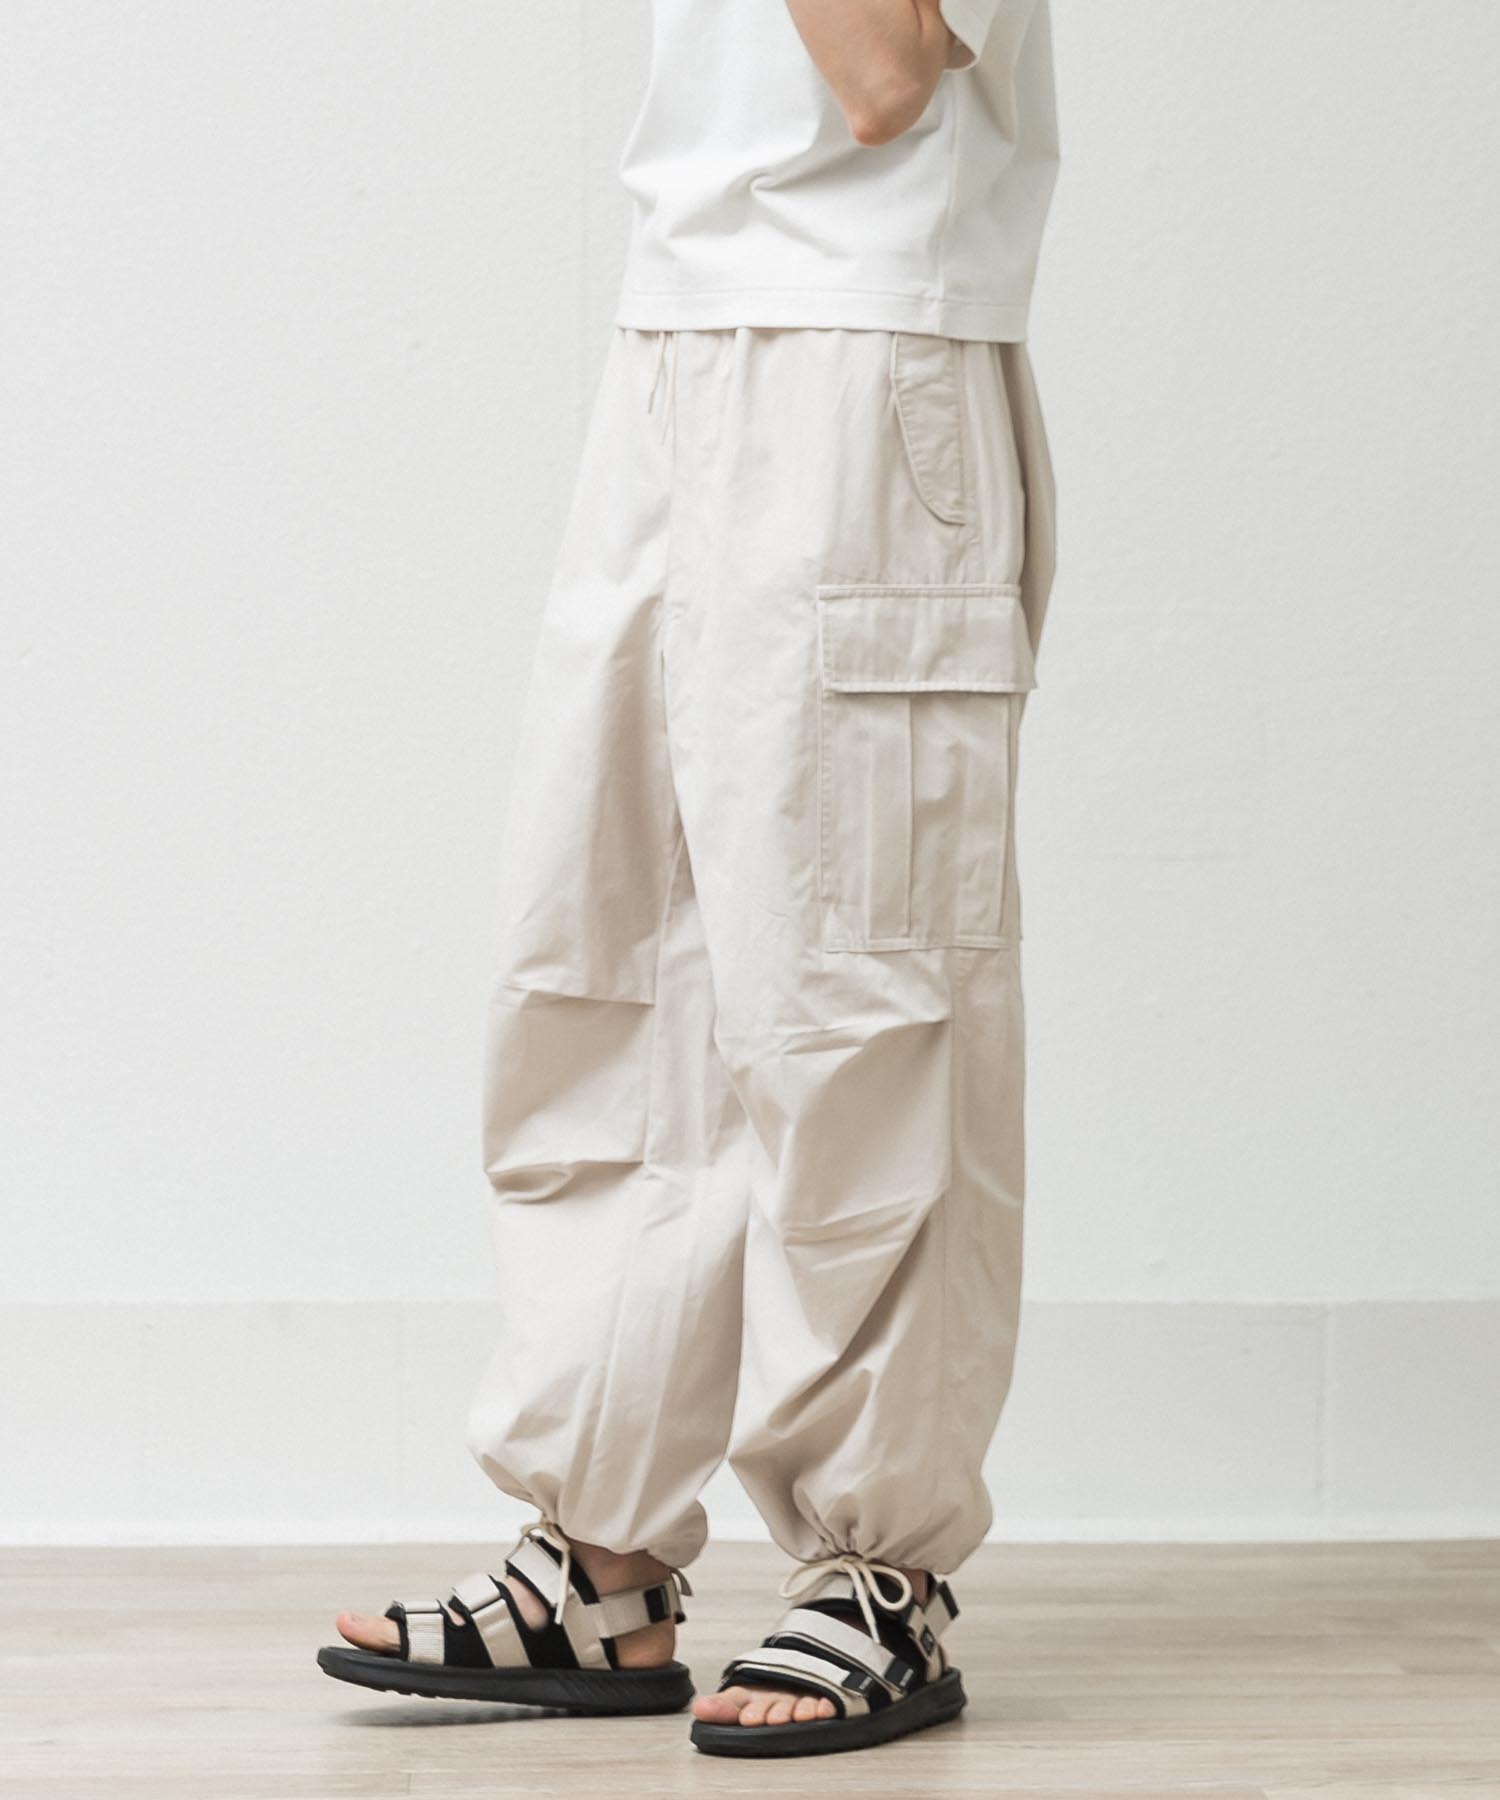 M-51 Military Shell Pants - IVORY